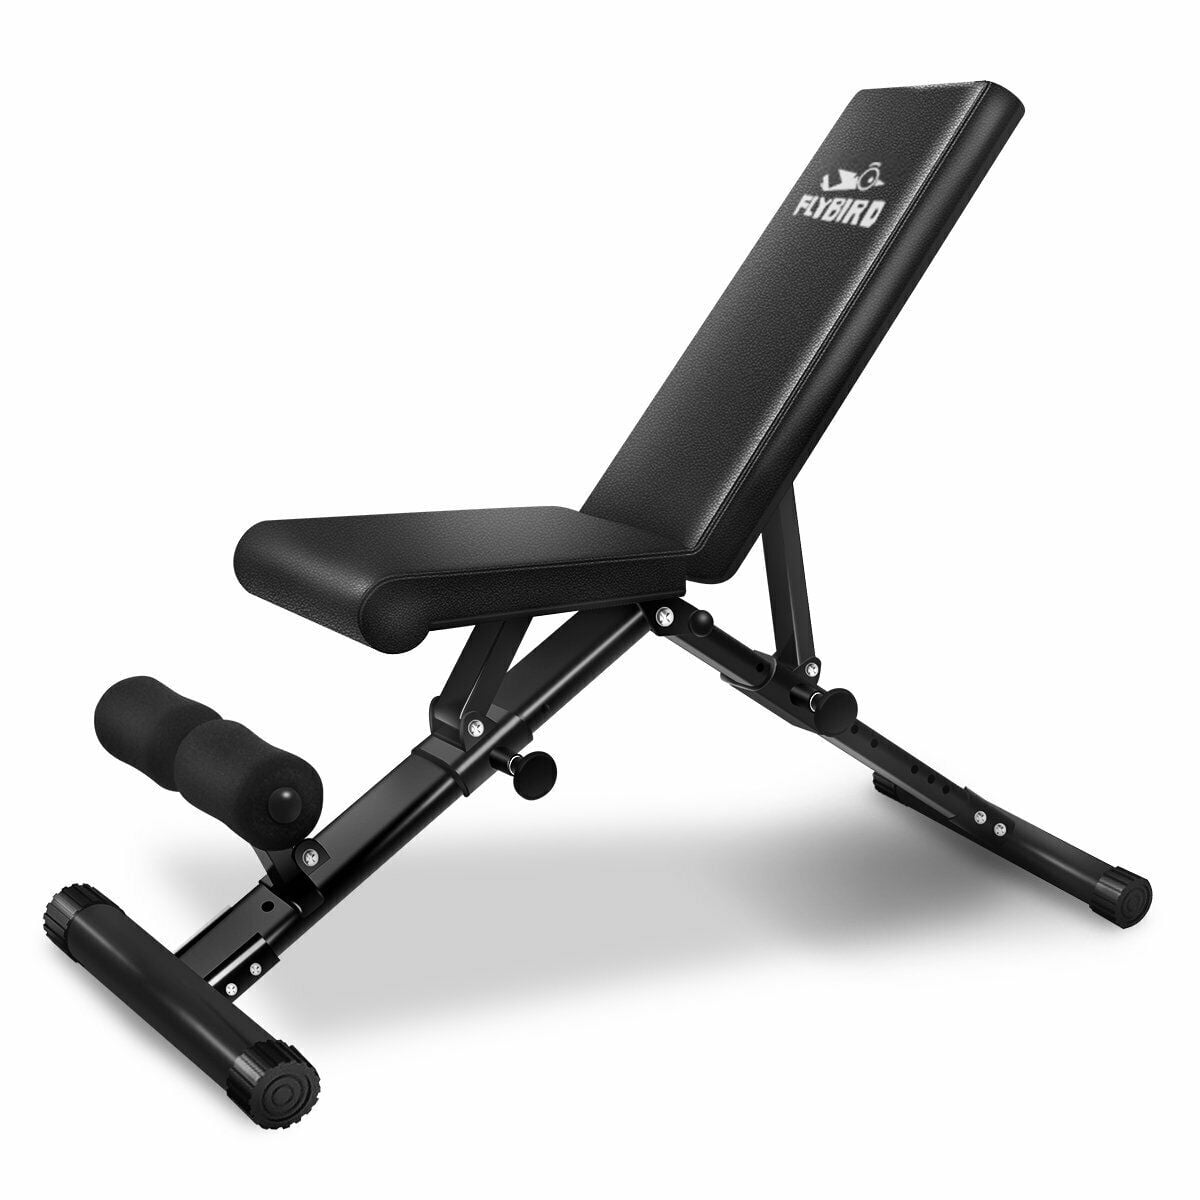 Details about   FlyBird Adjustable Weight Bench Incline Decline Foldable Workout Full Body *Gym*